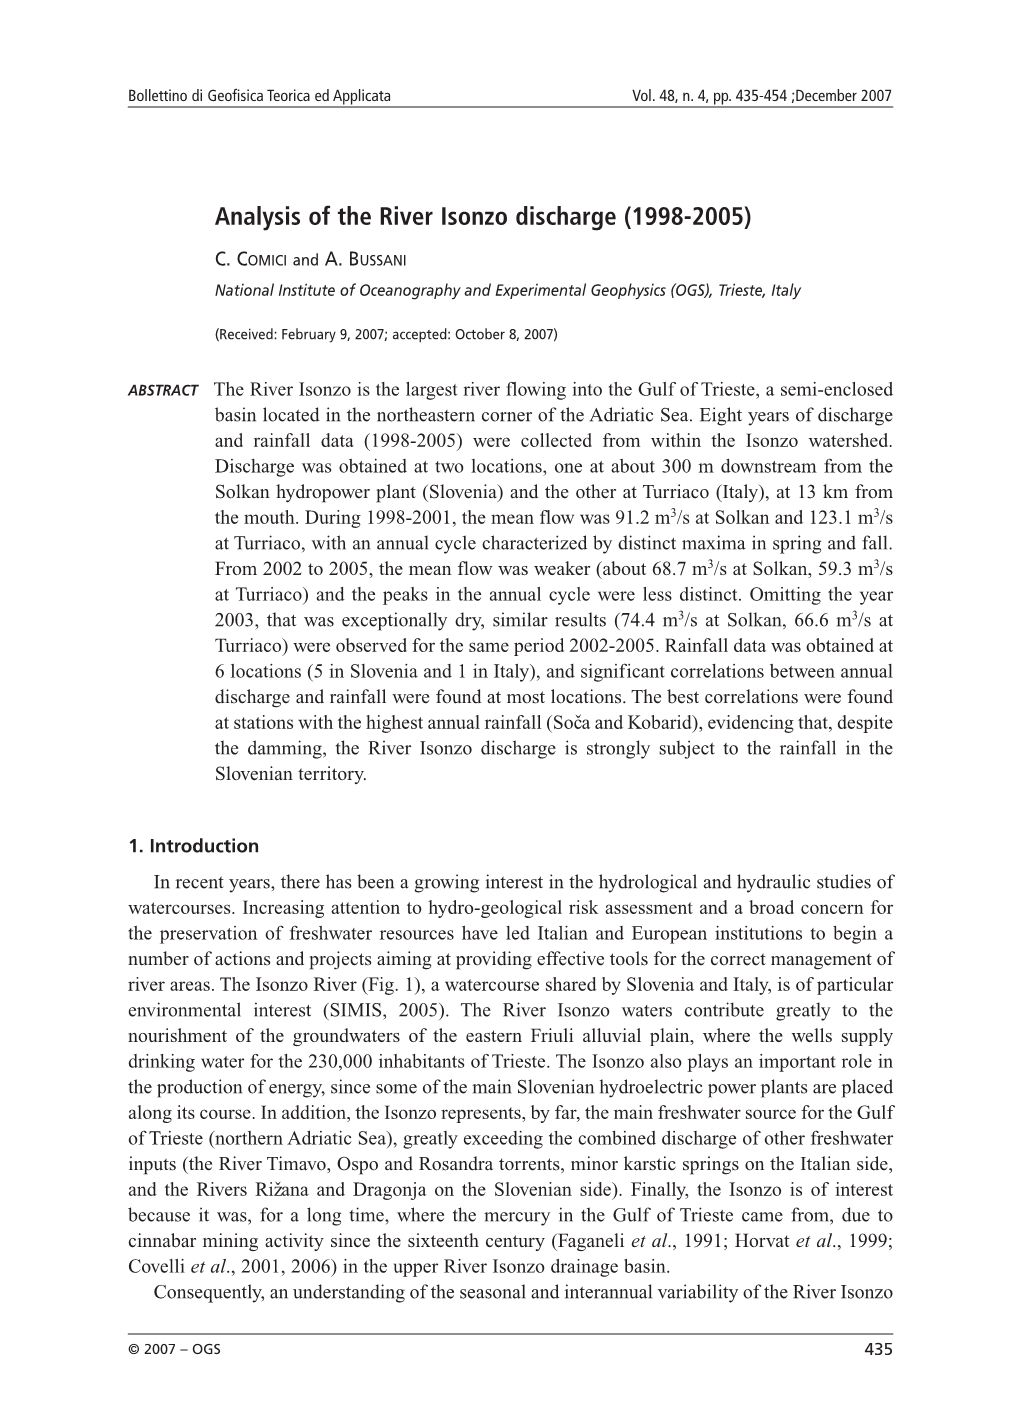 Analysis of the River Isonzo Discharge (1998-2005)